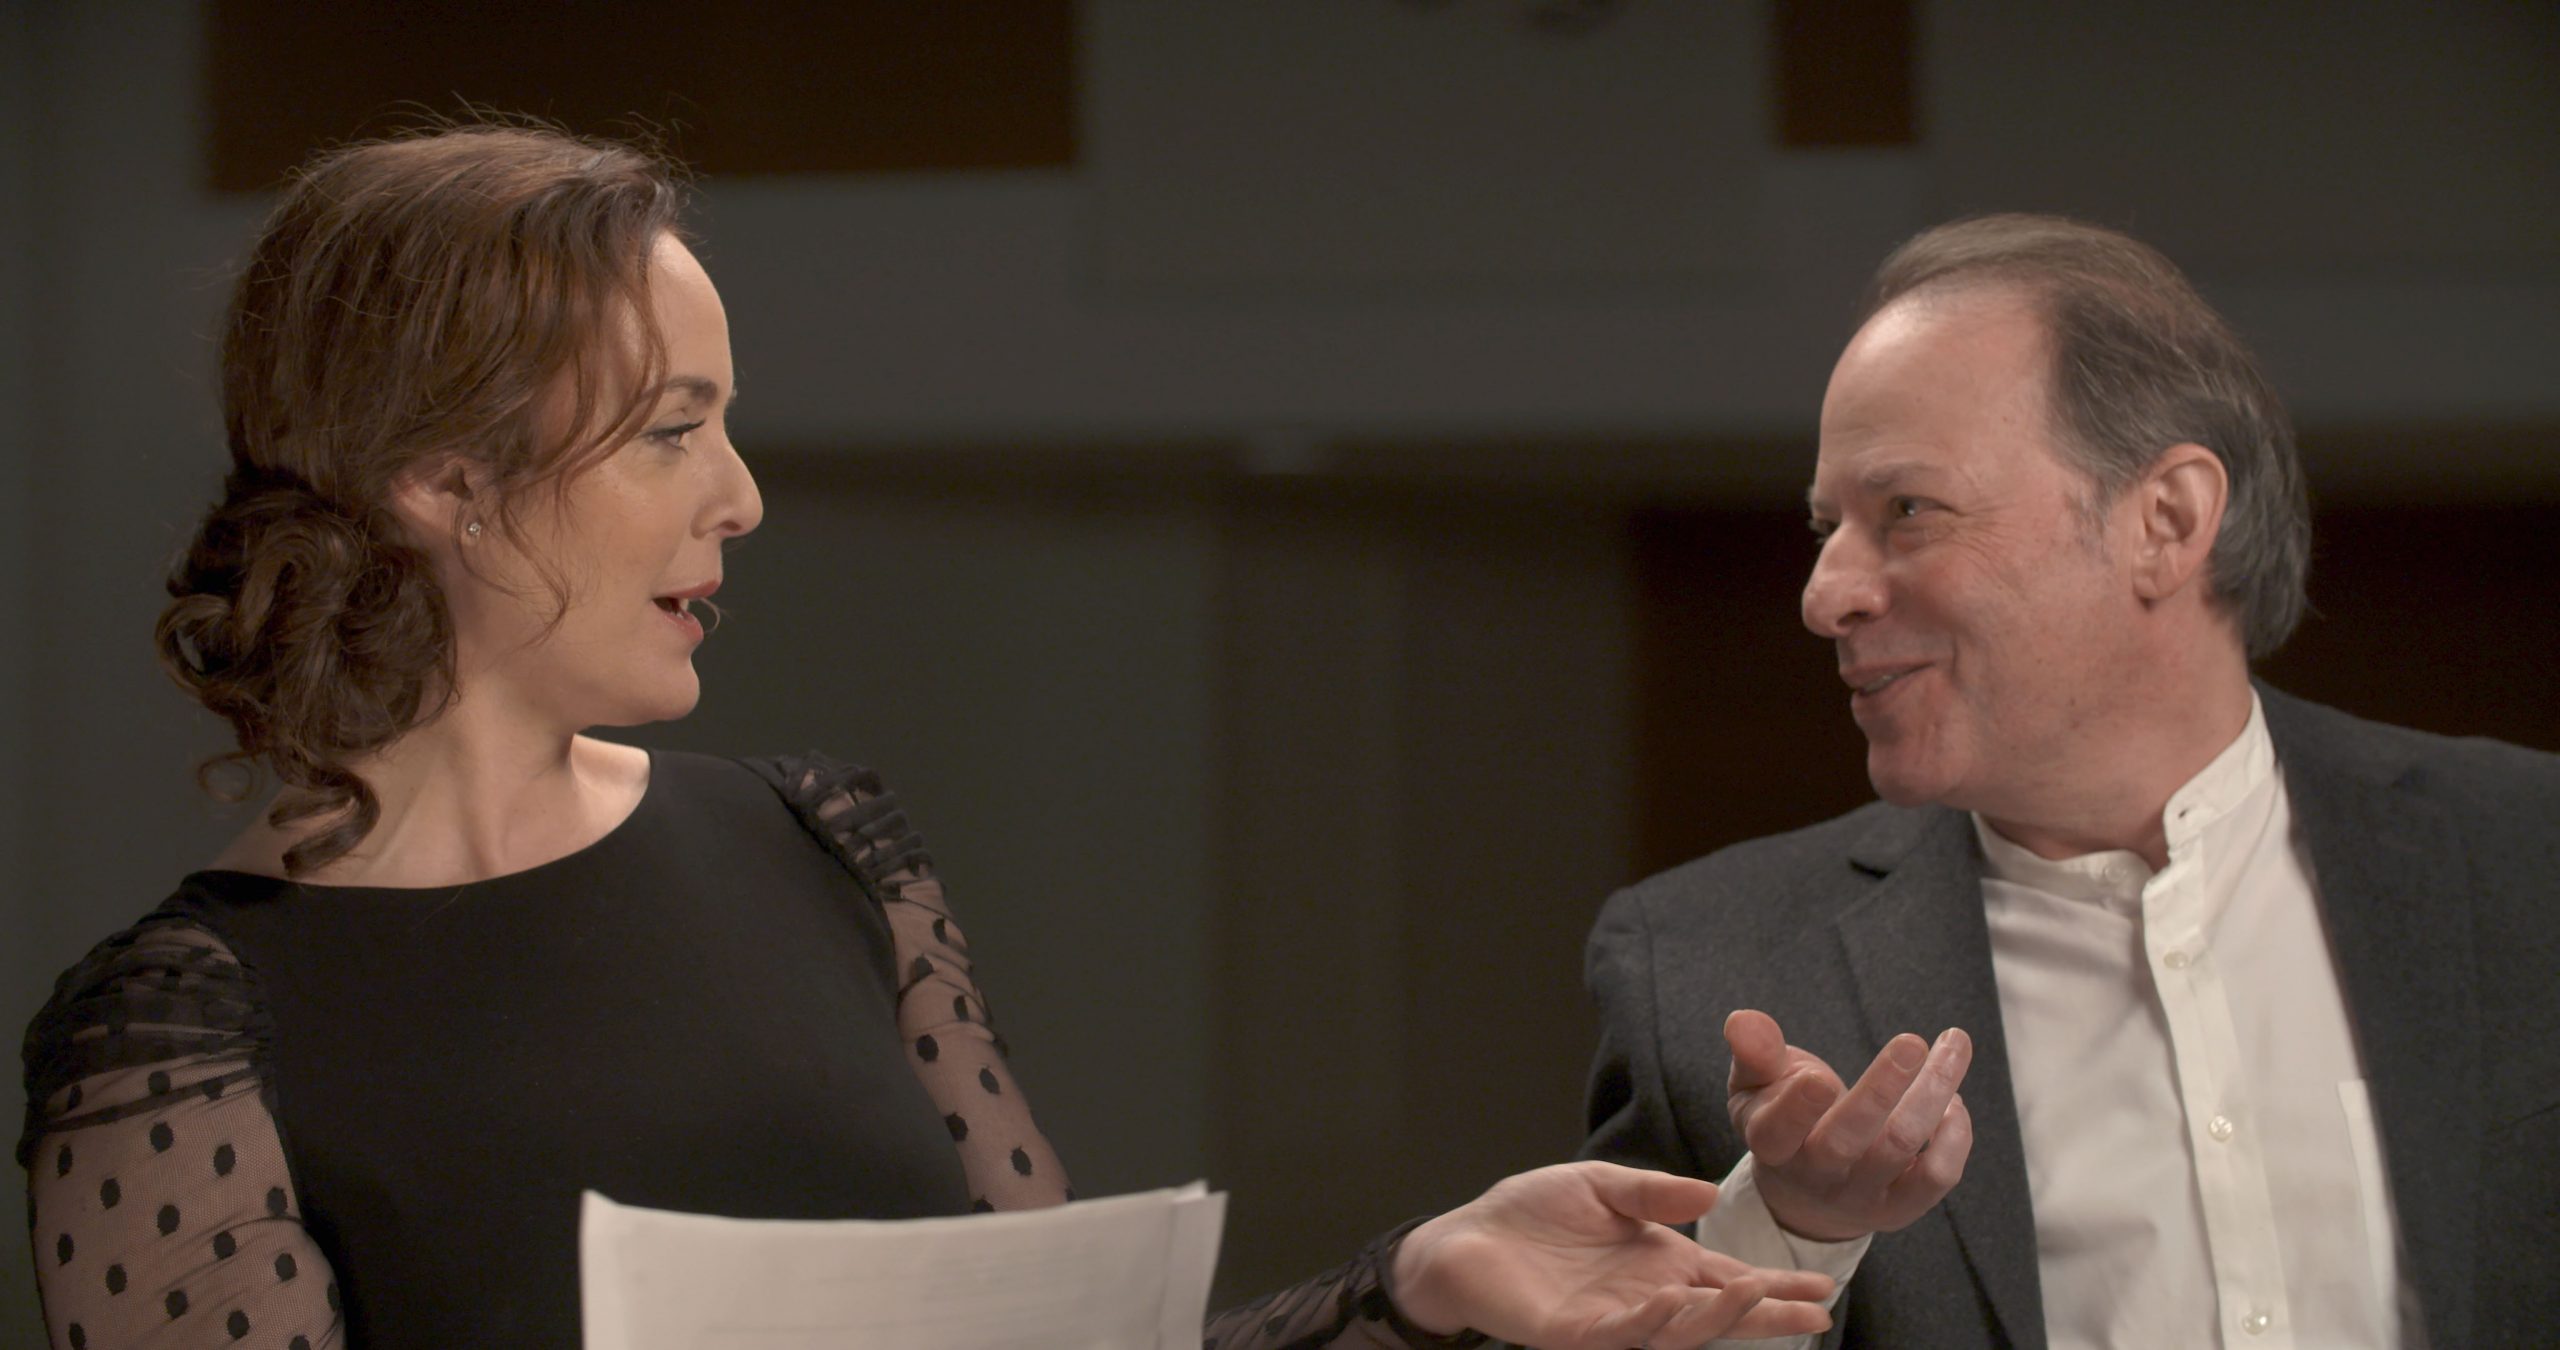 Melissa Errico on the left and Adam Gopnik on the right, in mid-conversation.